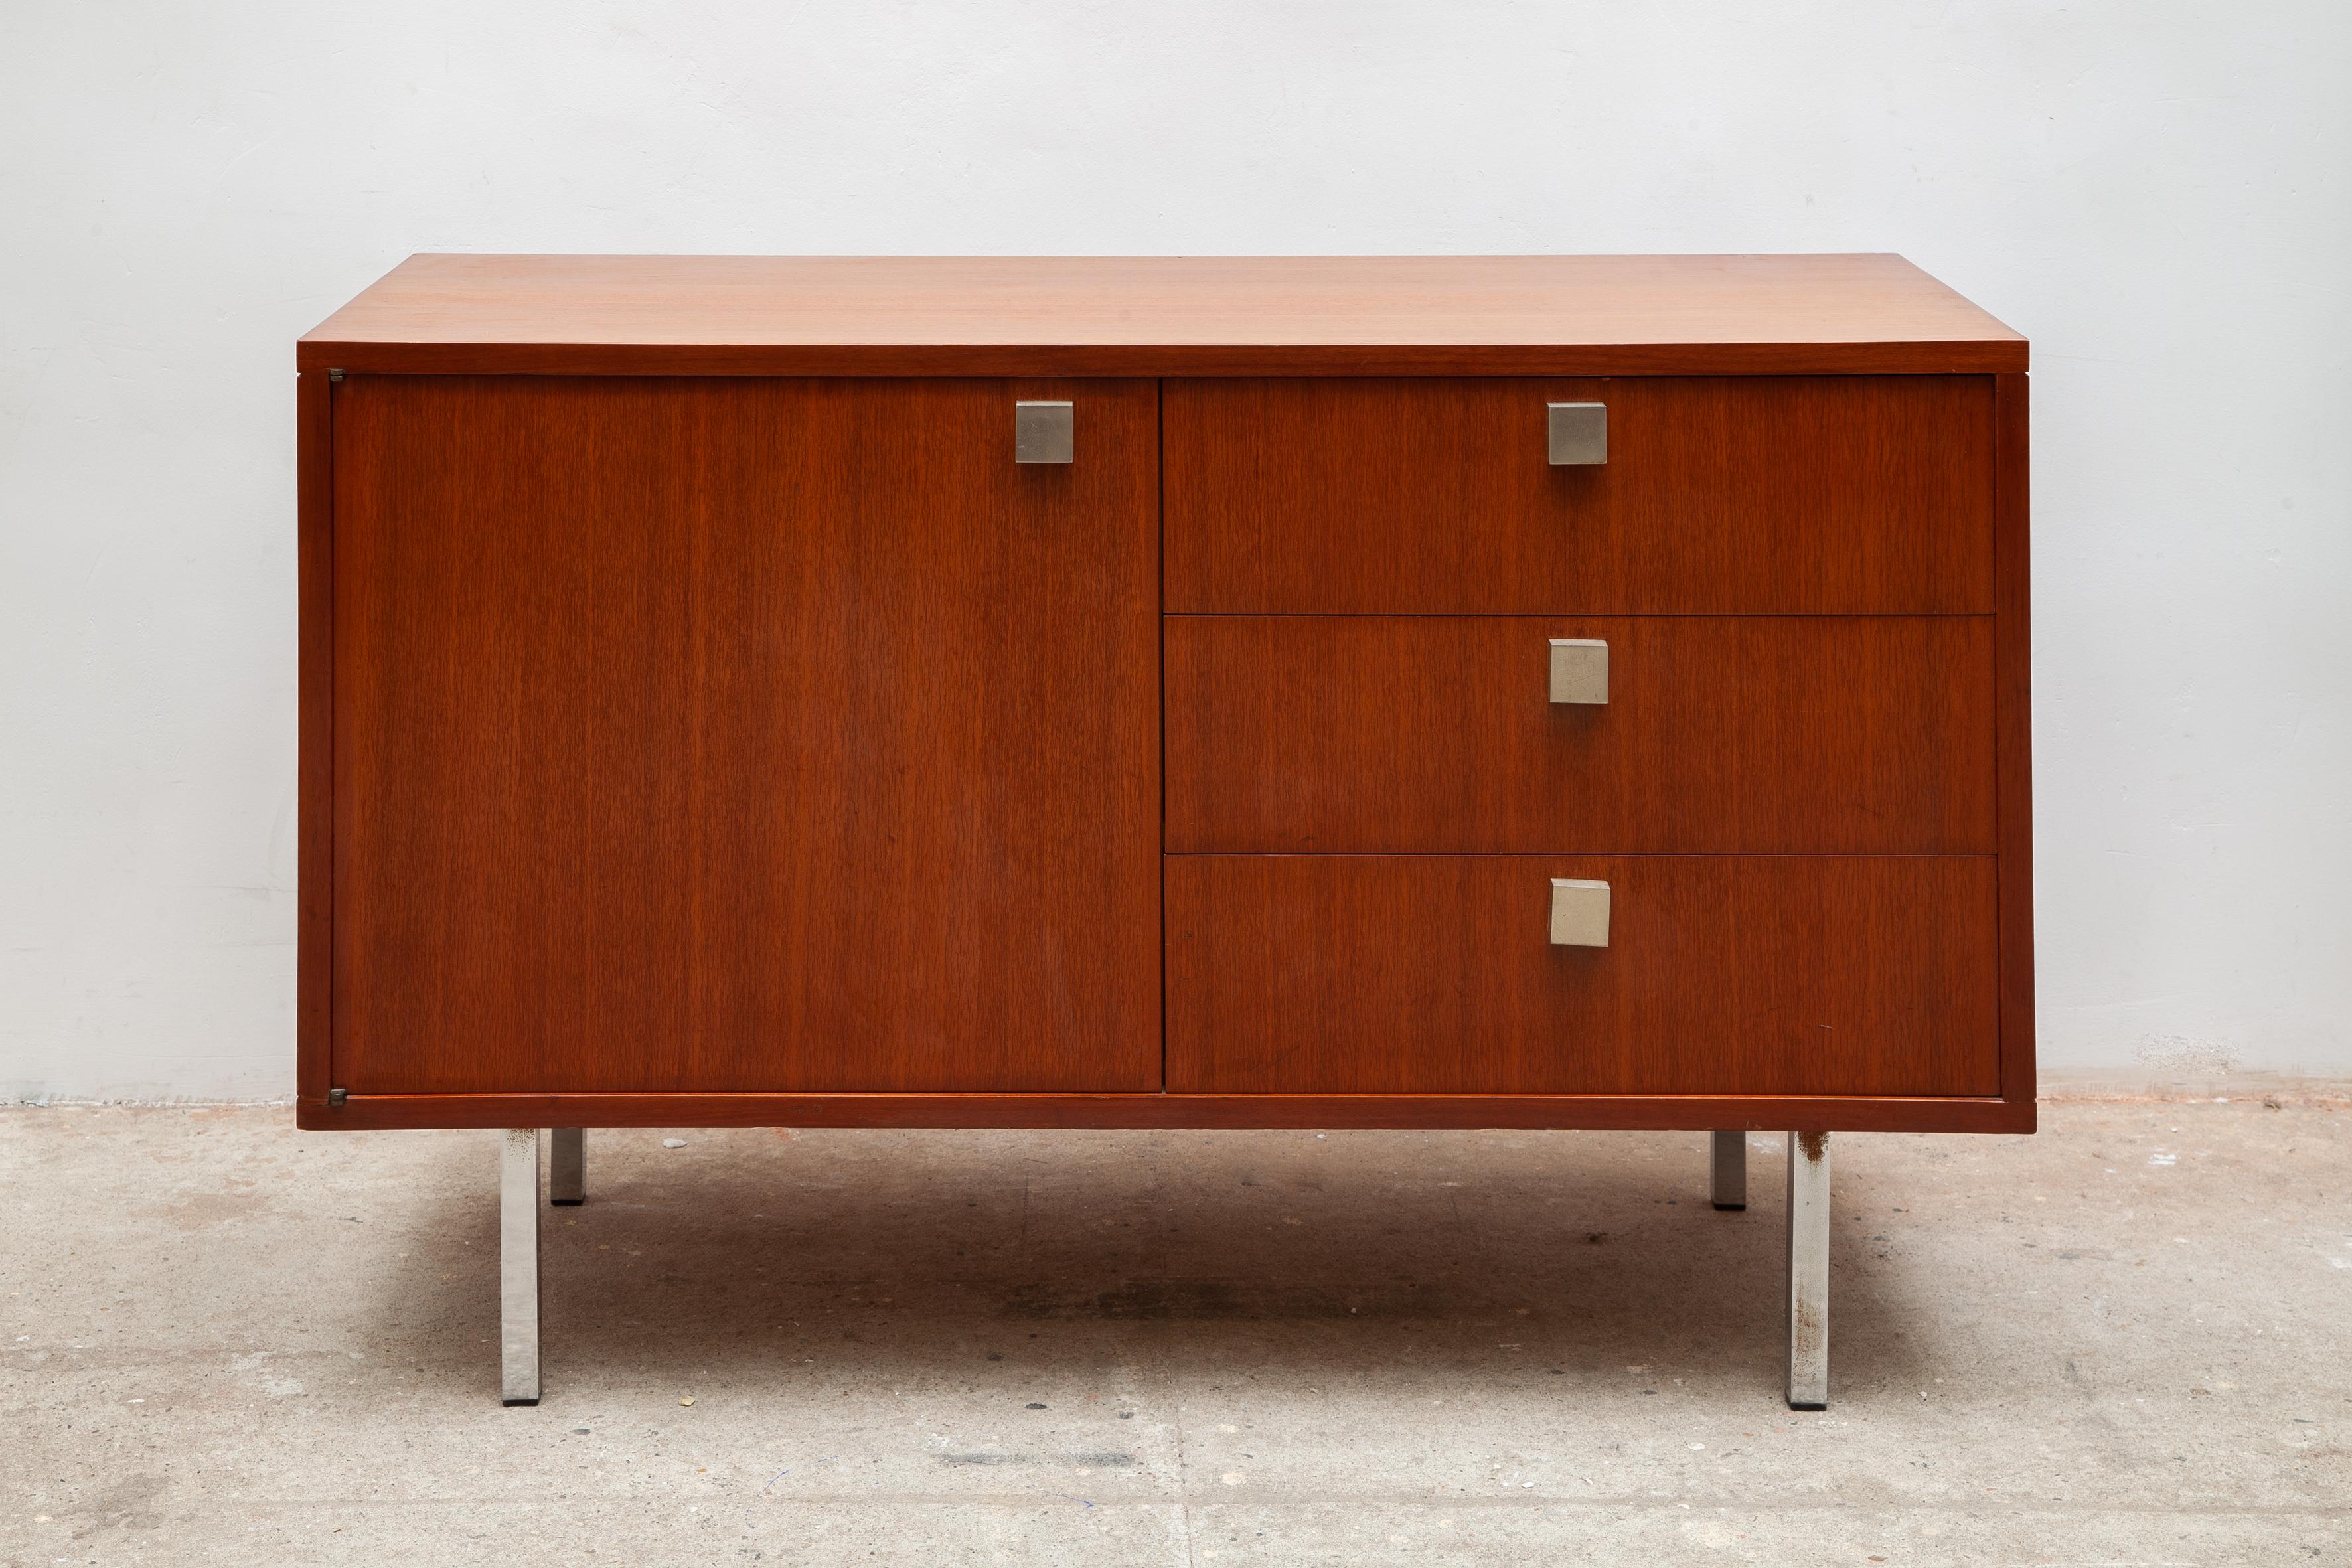 Small minimalist sideboard by Hendrickx, Belform 1962, Belgium. Small cabinet with one adjustable shelve and three dovetail drawers. Its finished with square metal doorknobs and a nice pattern veneer on the in- and outside, metal chrome legs.